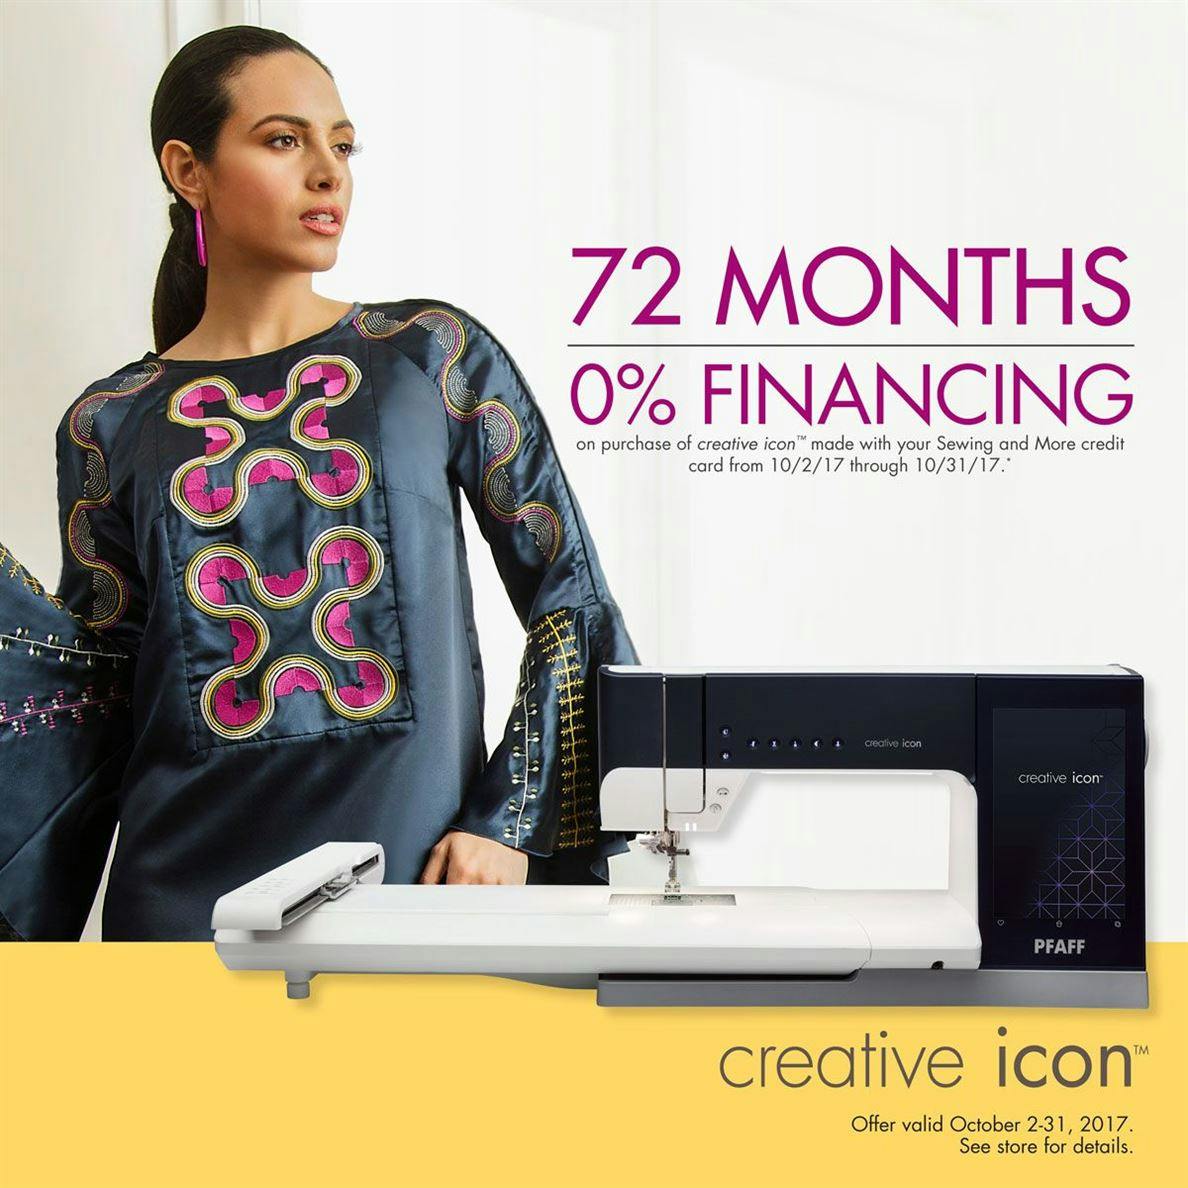 Photo of PFAFF Creative Icon with 72 month financing promotion